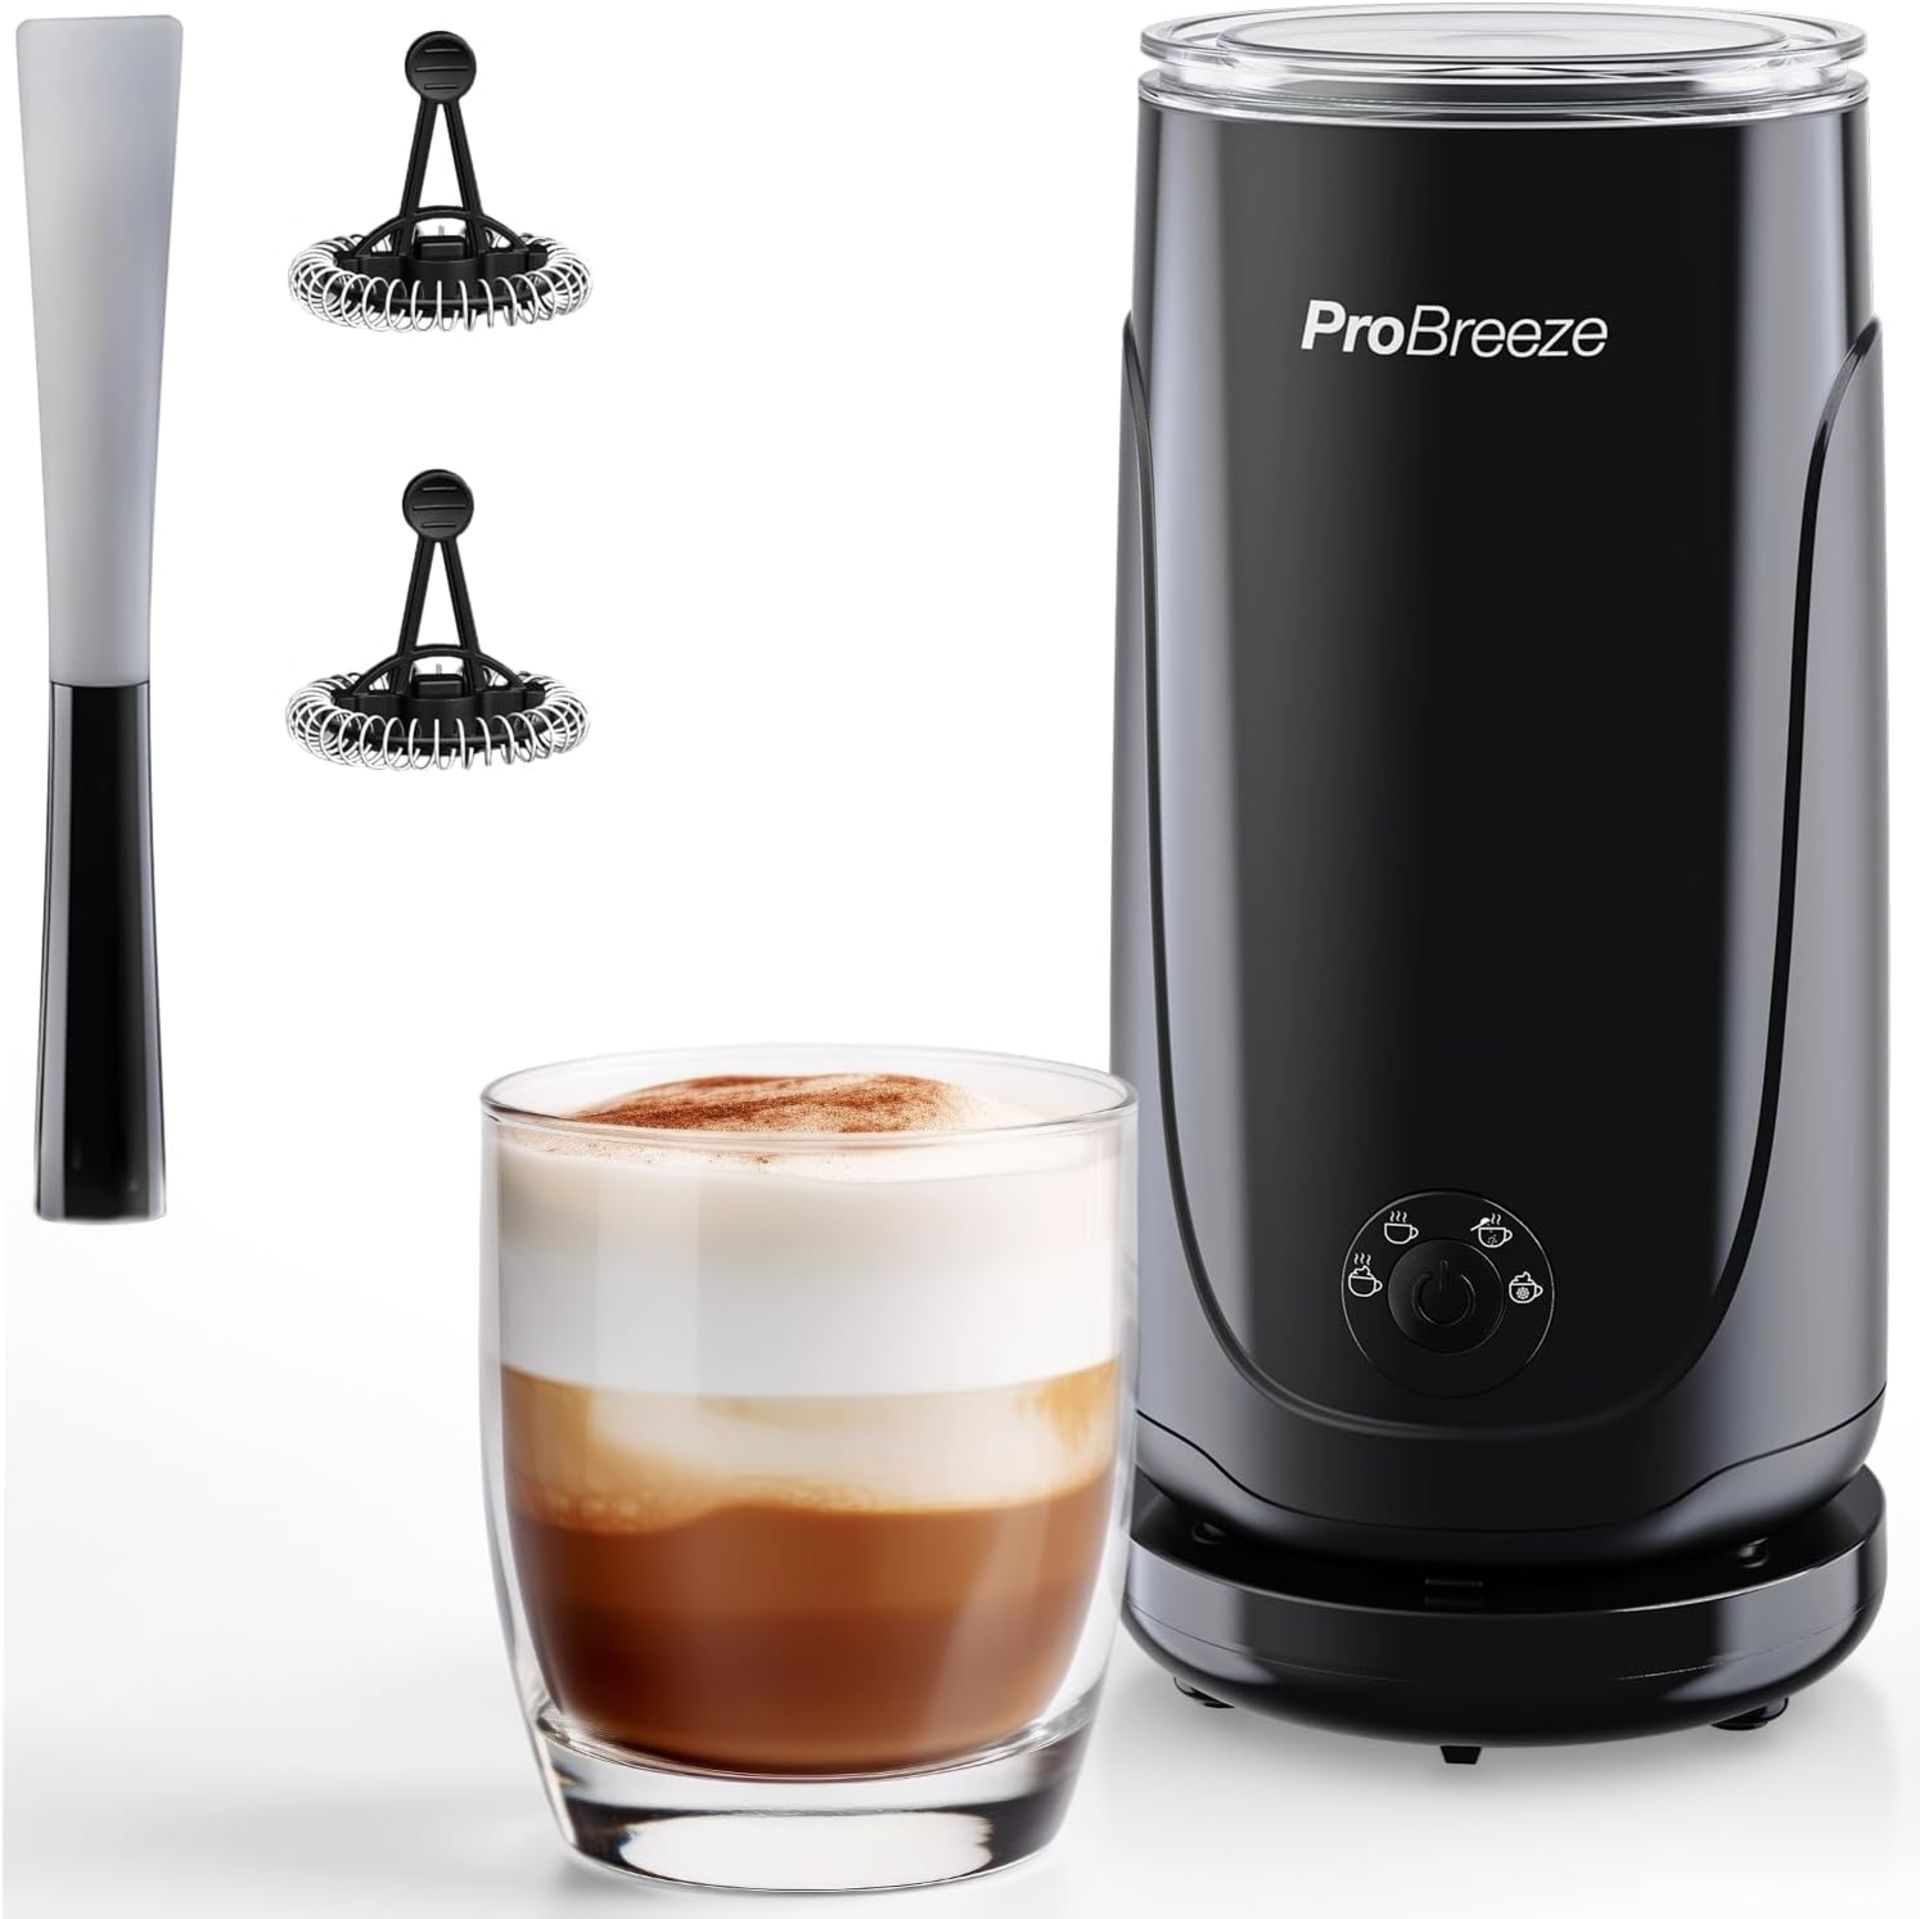 PALLET TO CONTAIN 25 X Pro Breeze® Electric Milk Frother, Steamer & Warmer. RRP £37 EACH - Automatic - Image 4 of 7